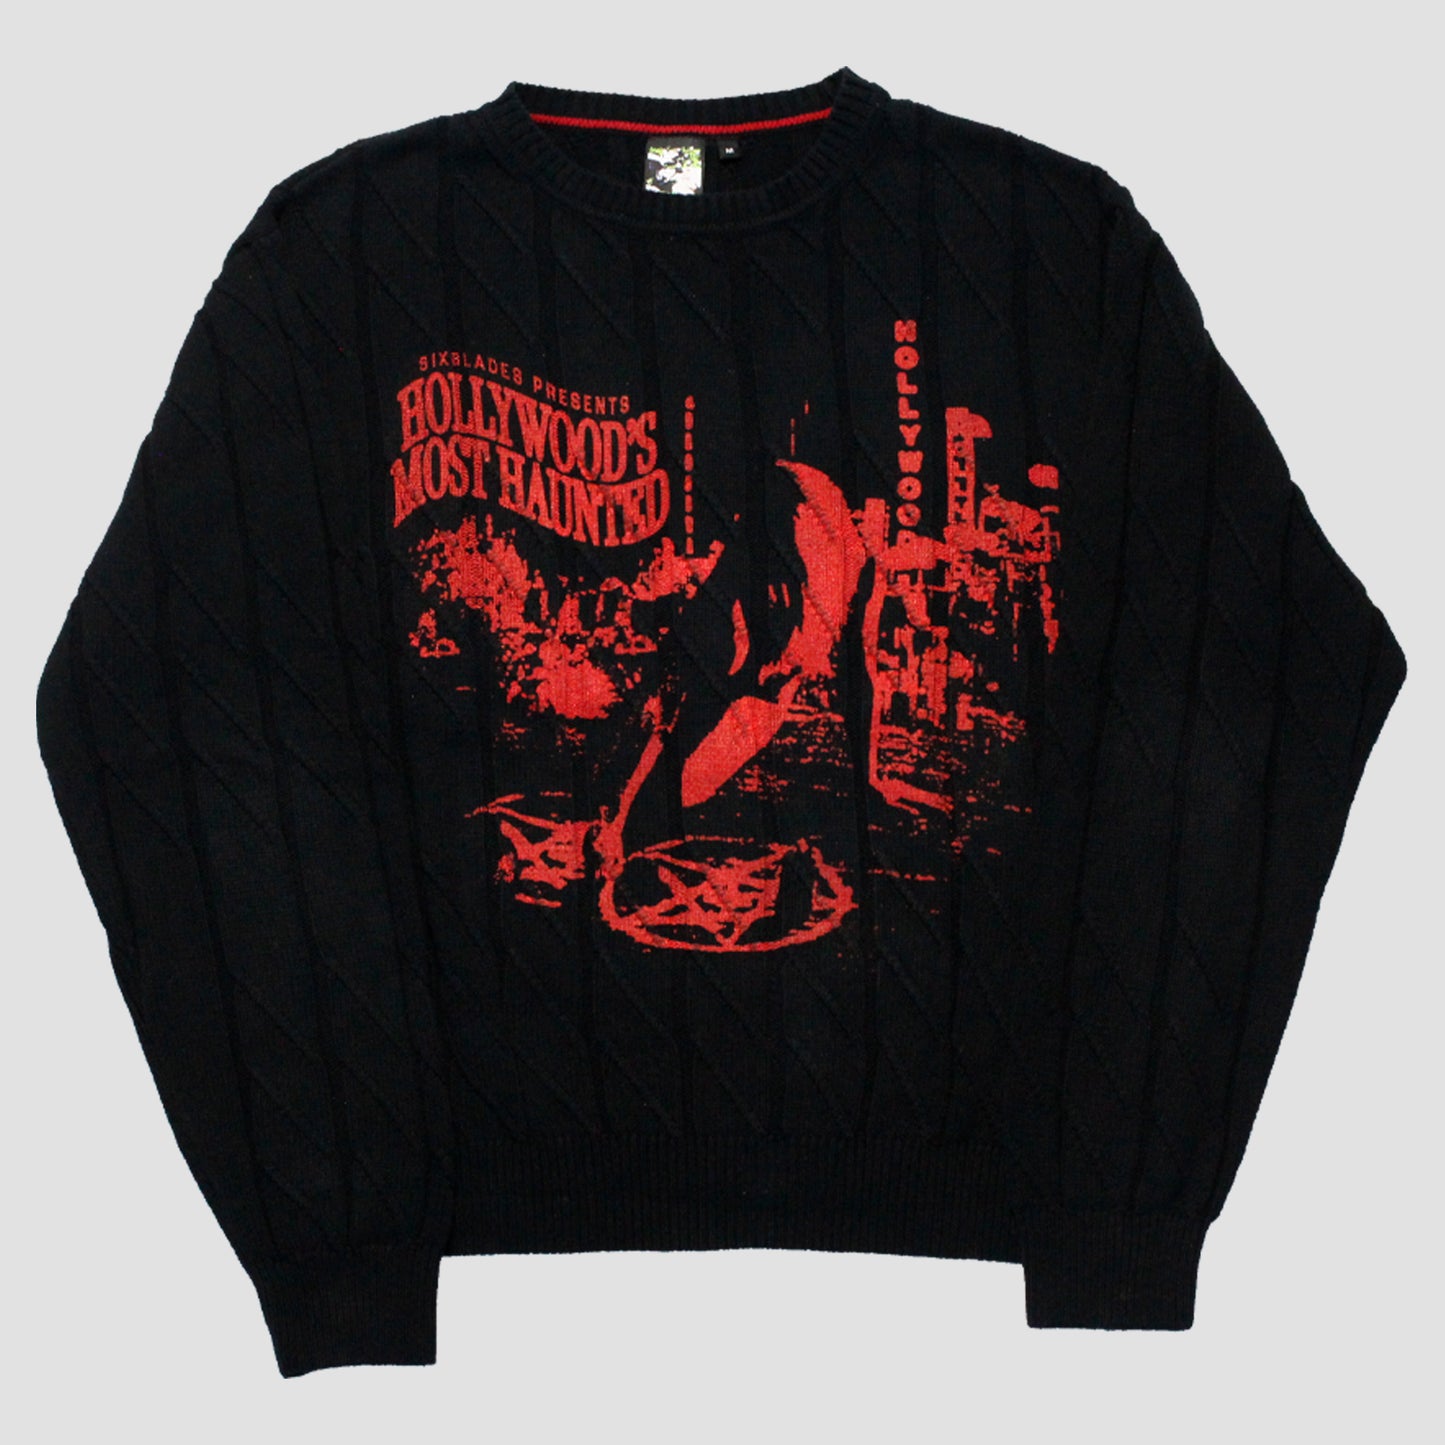 "HOLLYWOOD'S MOST HAUNTED" Heavyweight Knit Sweater (M)